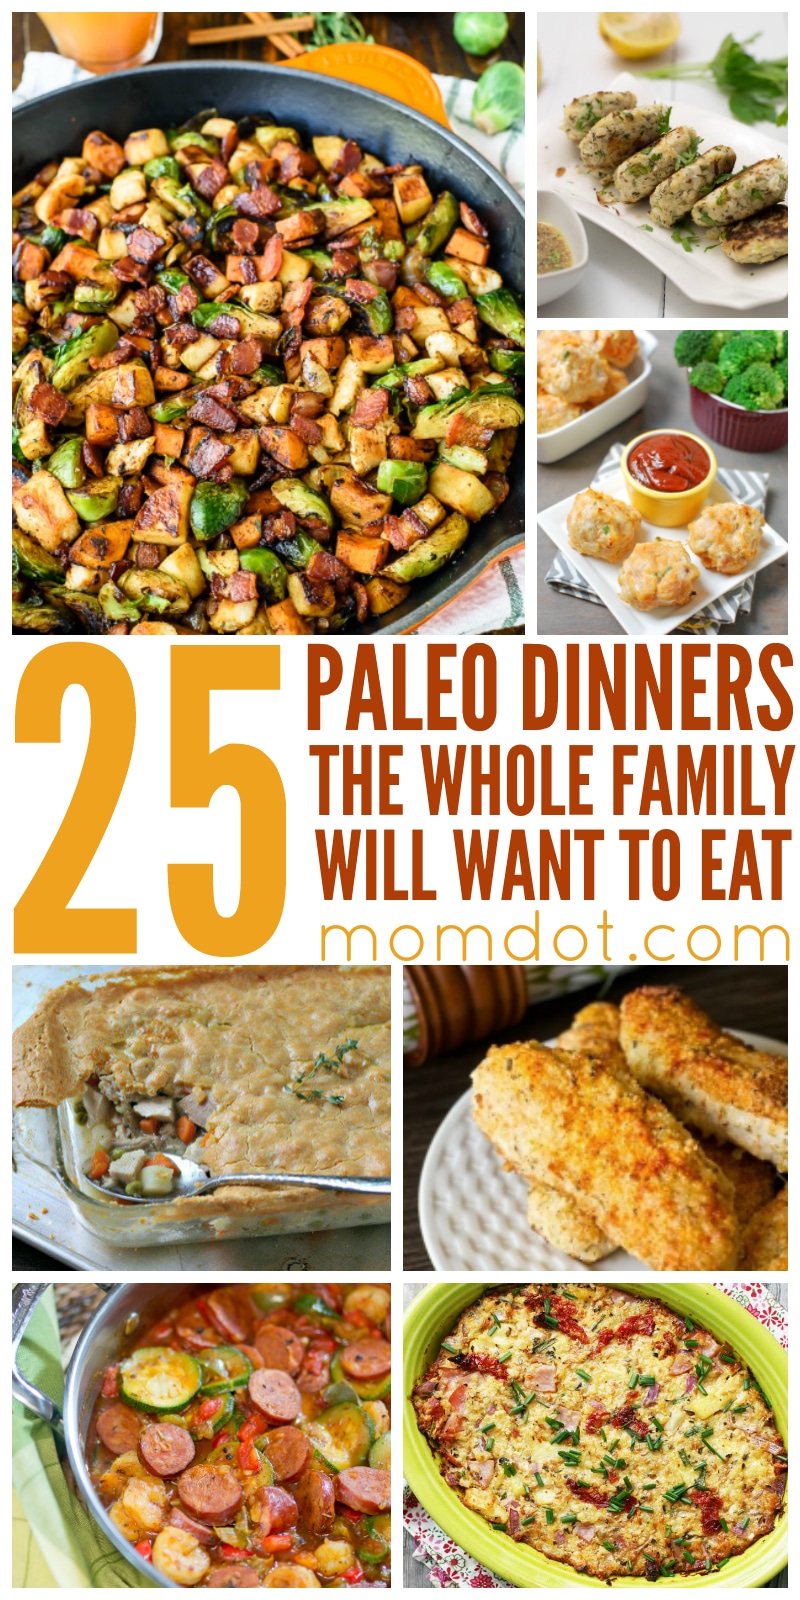 25 Paleo Dinner Recipes the whole family will love, on a paleo diet? Here are our favorite recipes